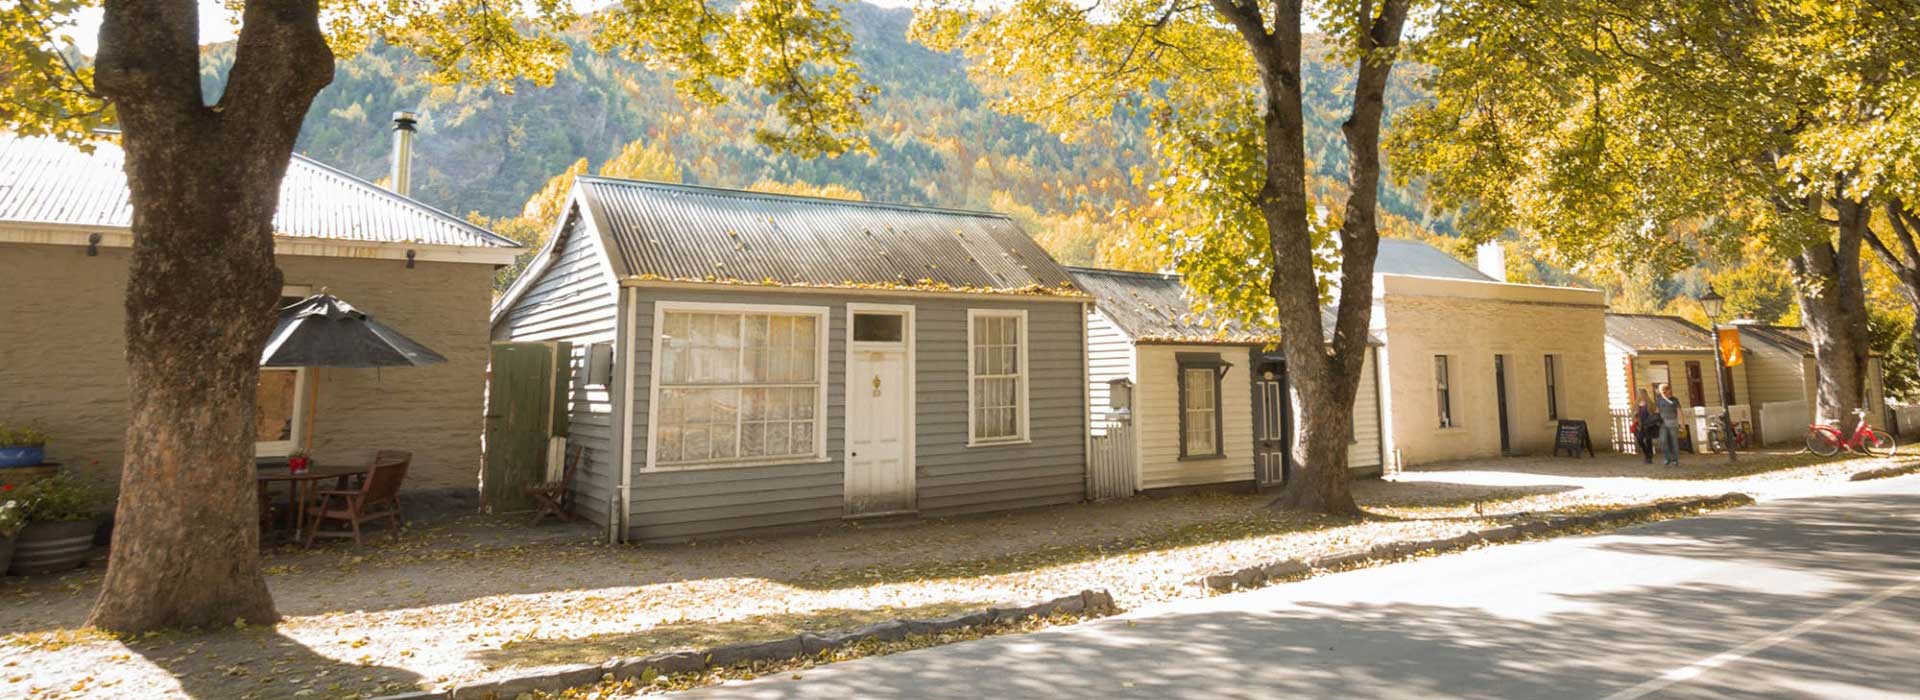 Things to do in Arrowtown